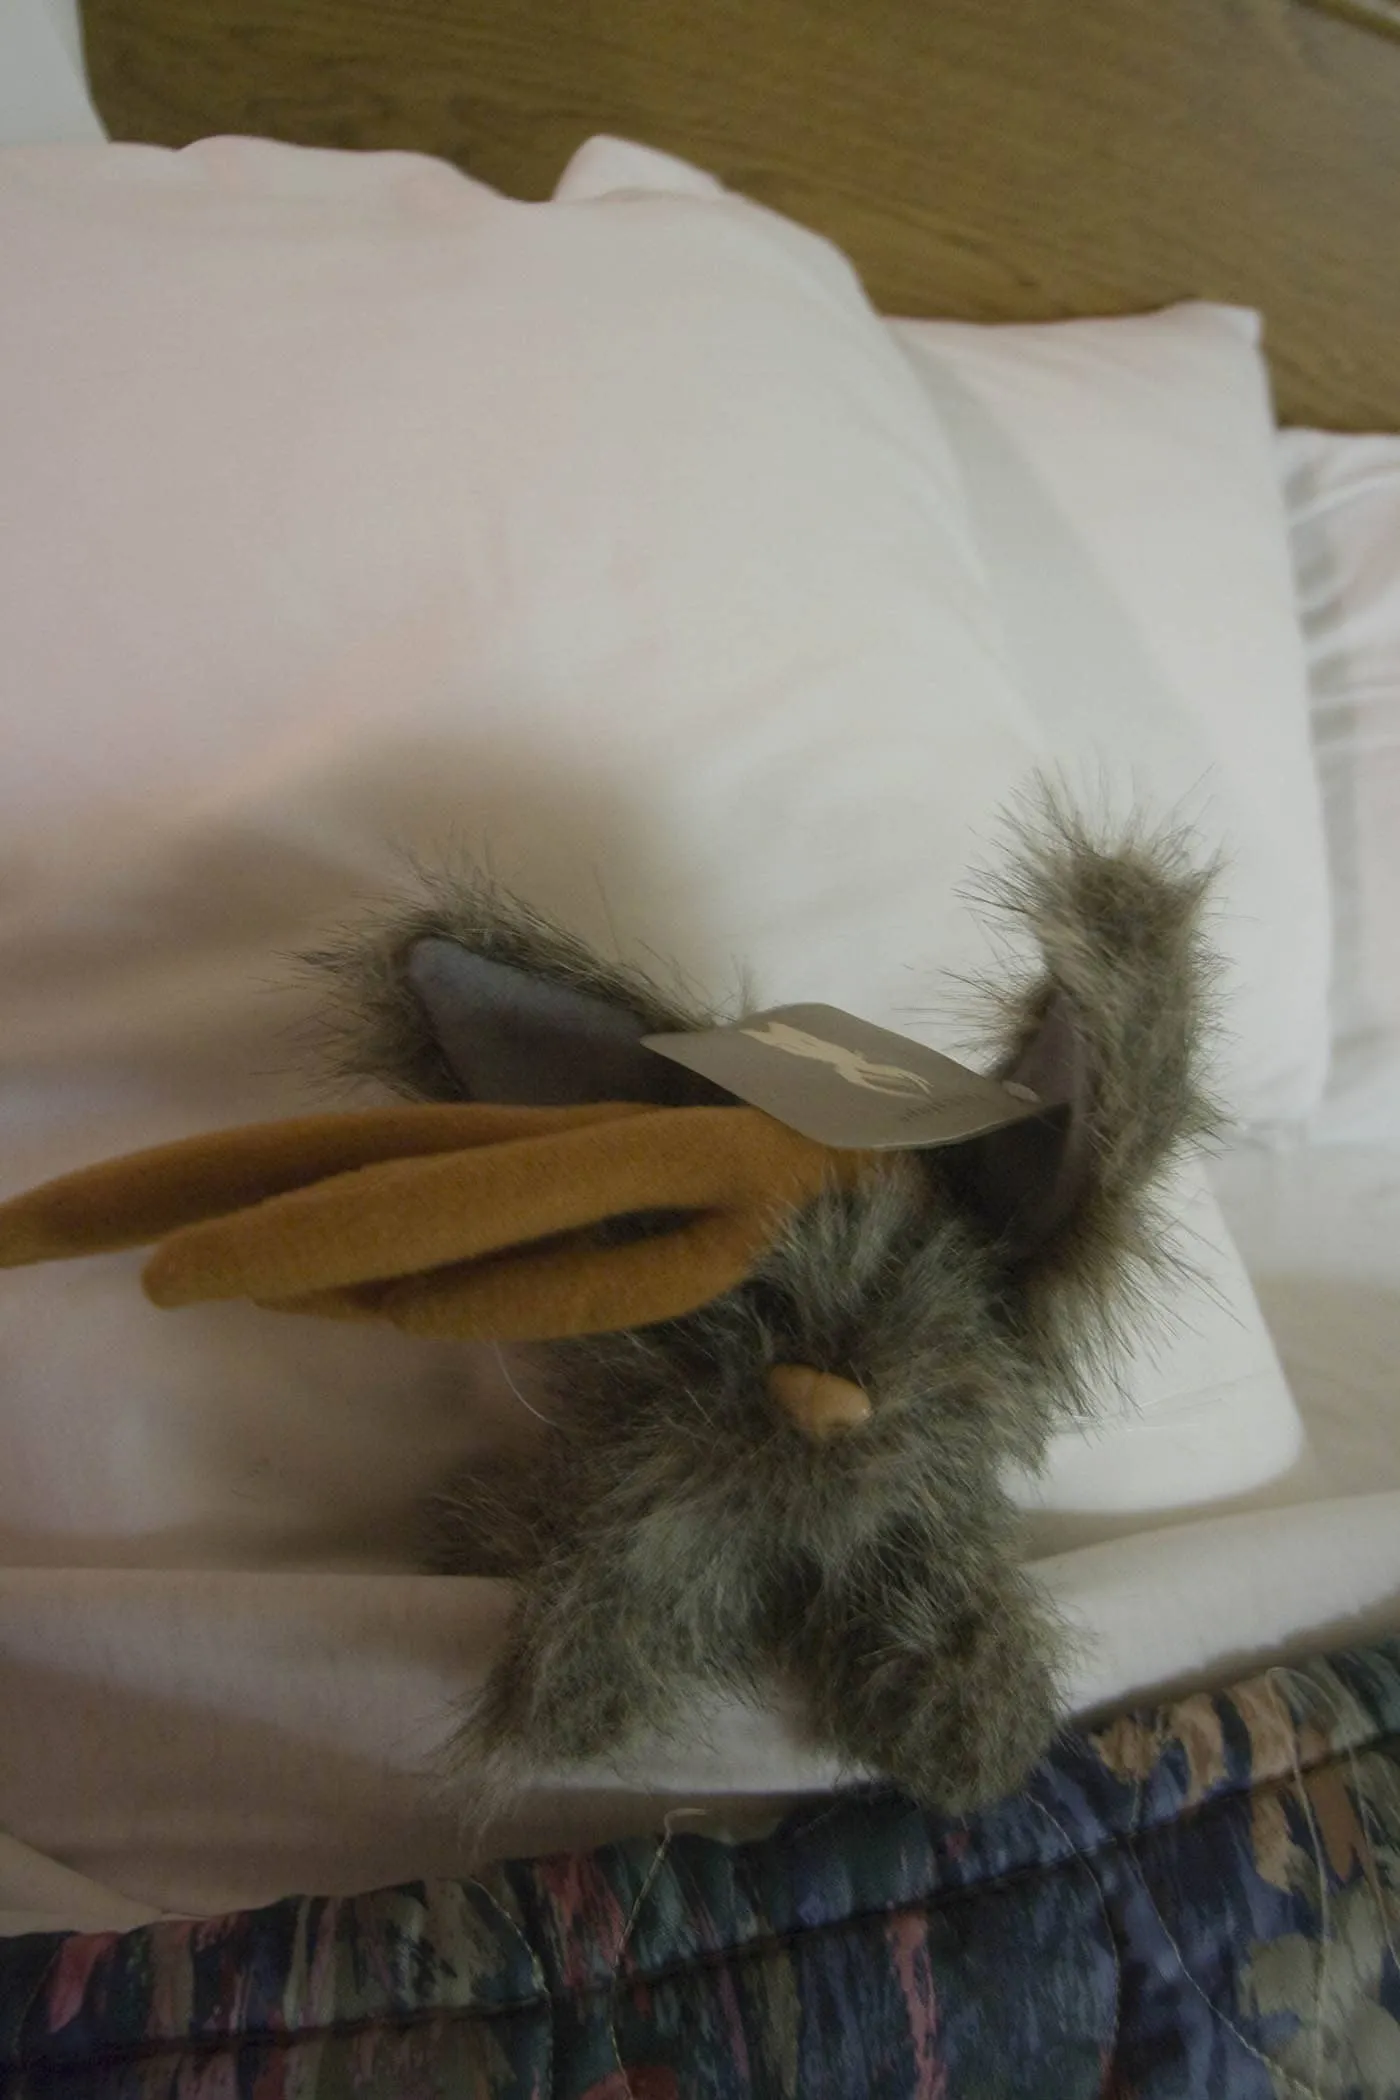 Flopsy the Jackalope - Silly America's jackalope mascot - tucked into a hotel bed after a long day of road tripping.